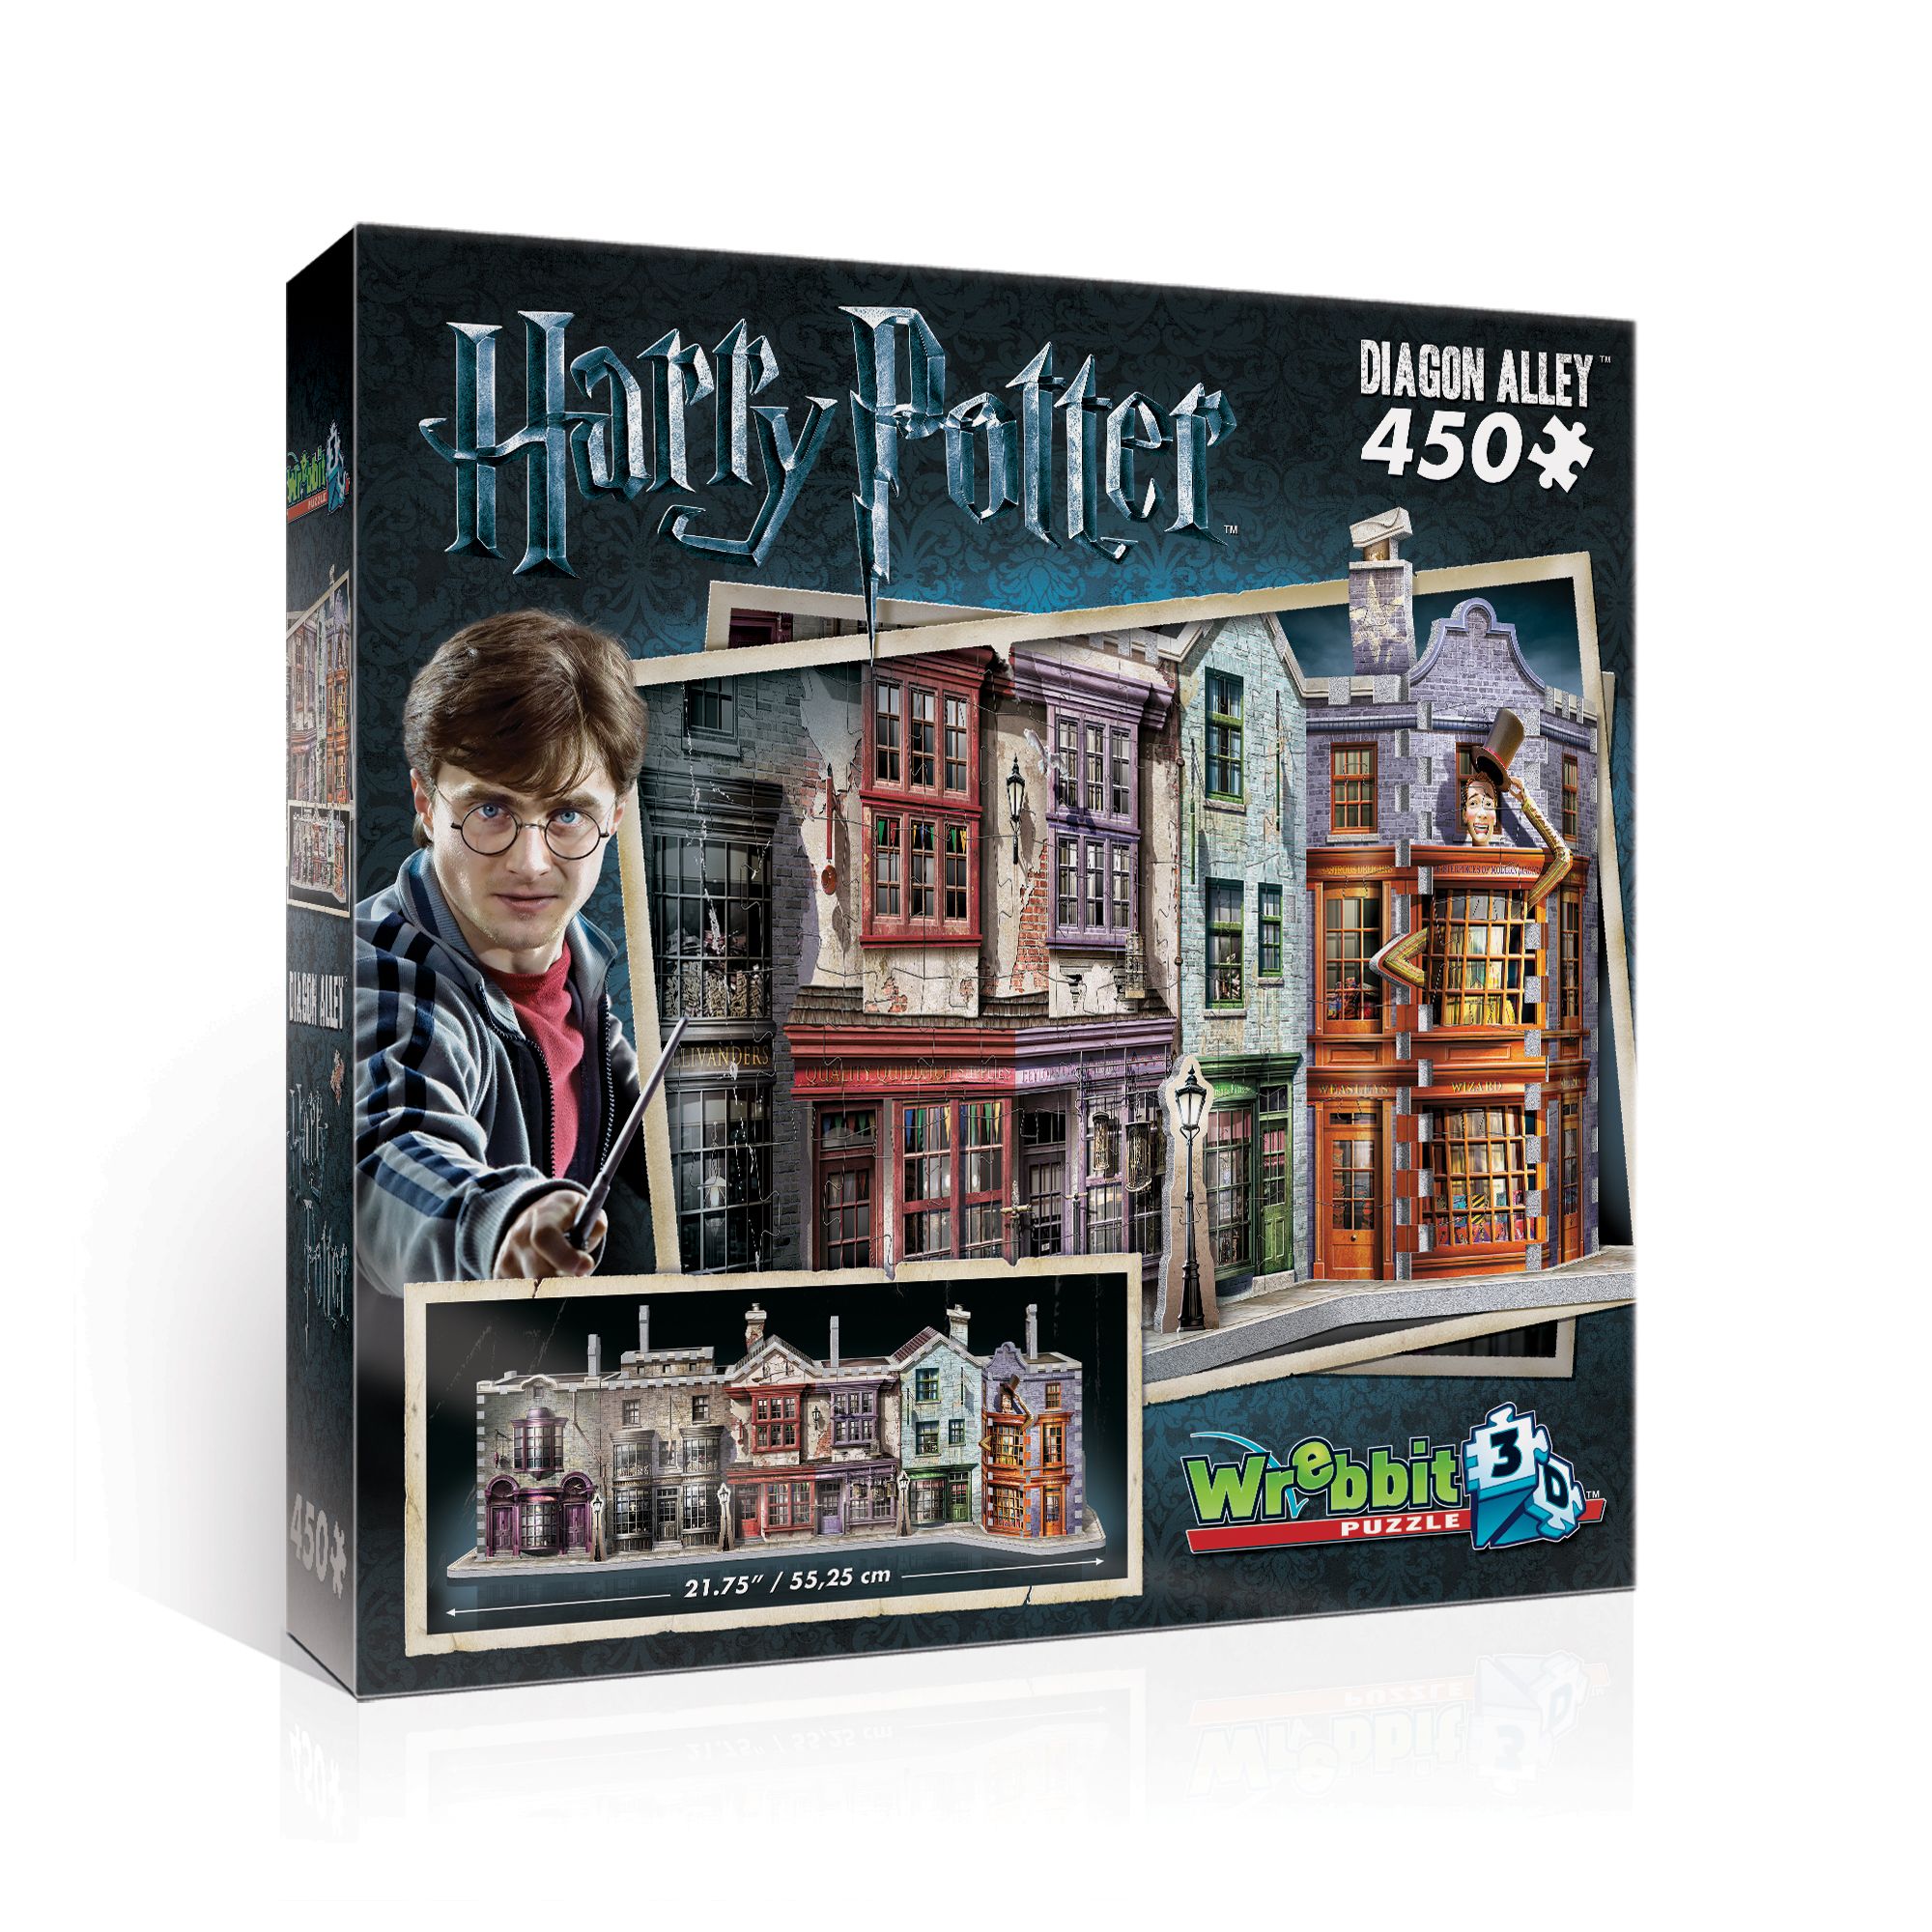 Hogwarts Brand New & Sealed Diagon Alley 3D Puzzle 450Pc 